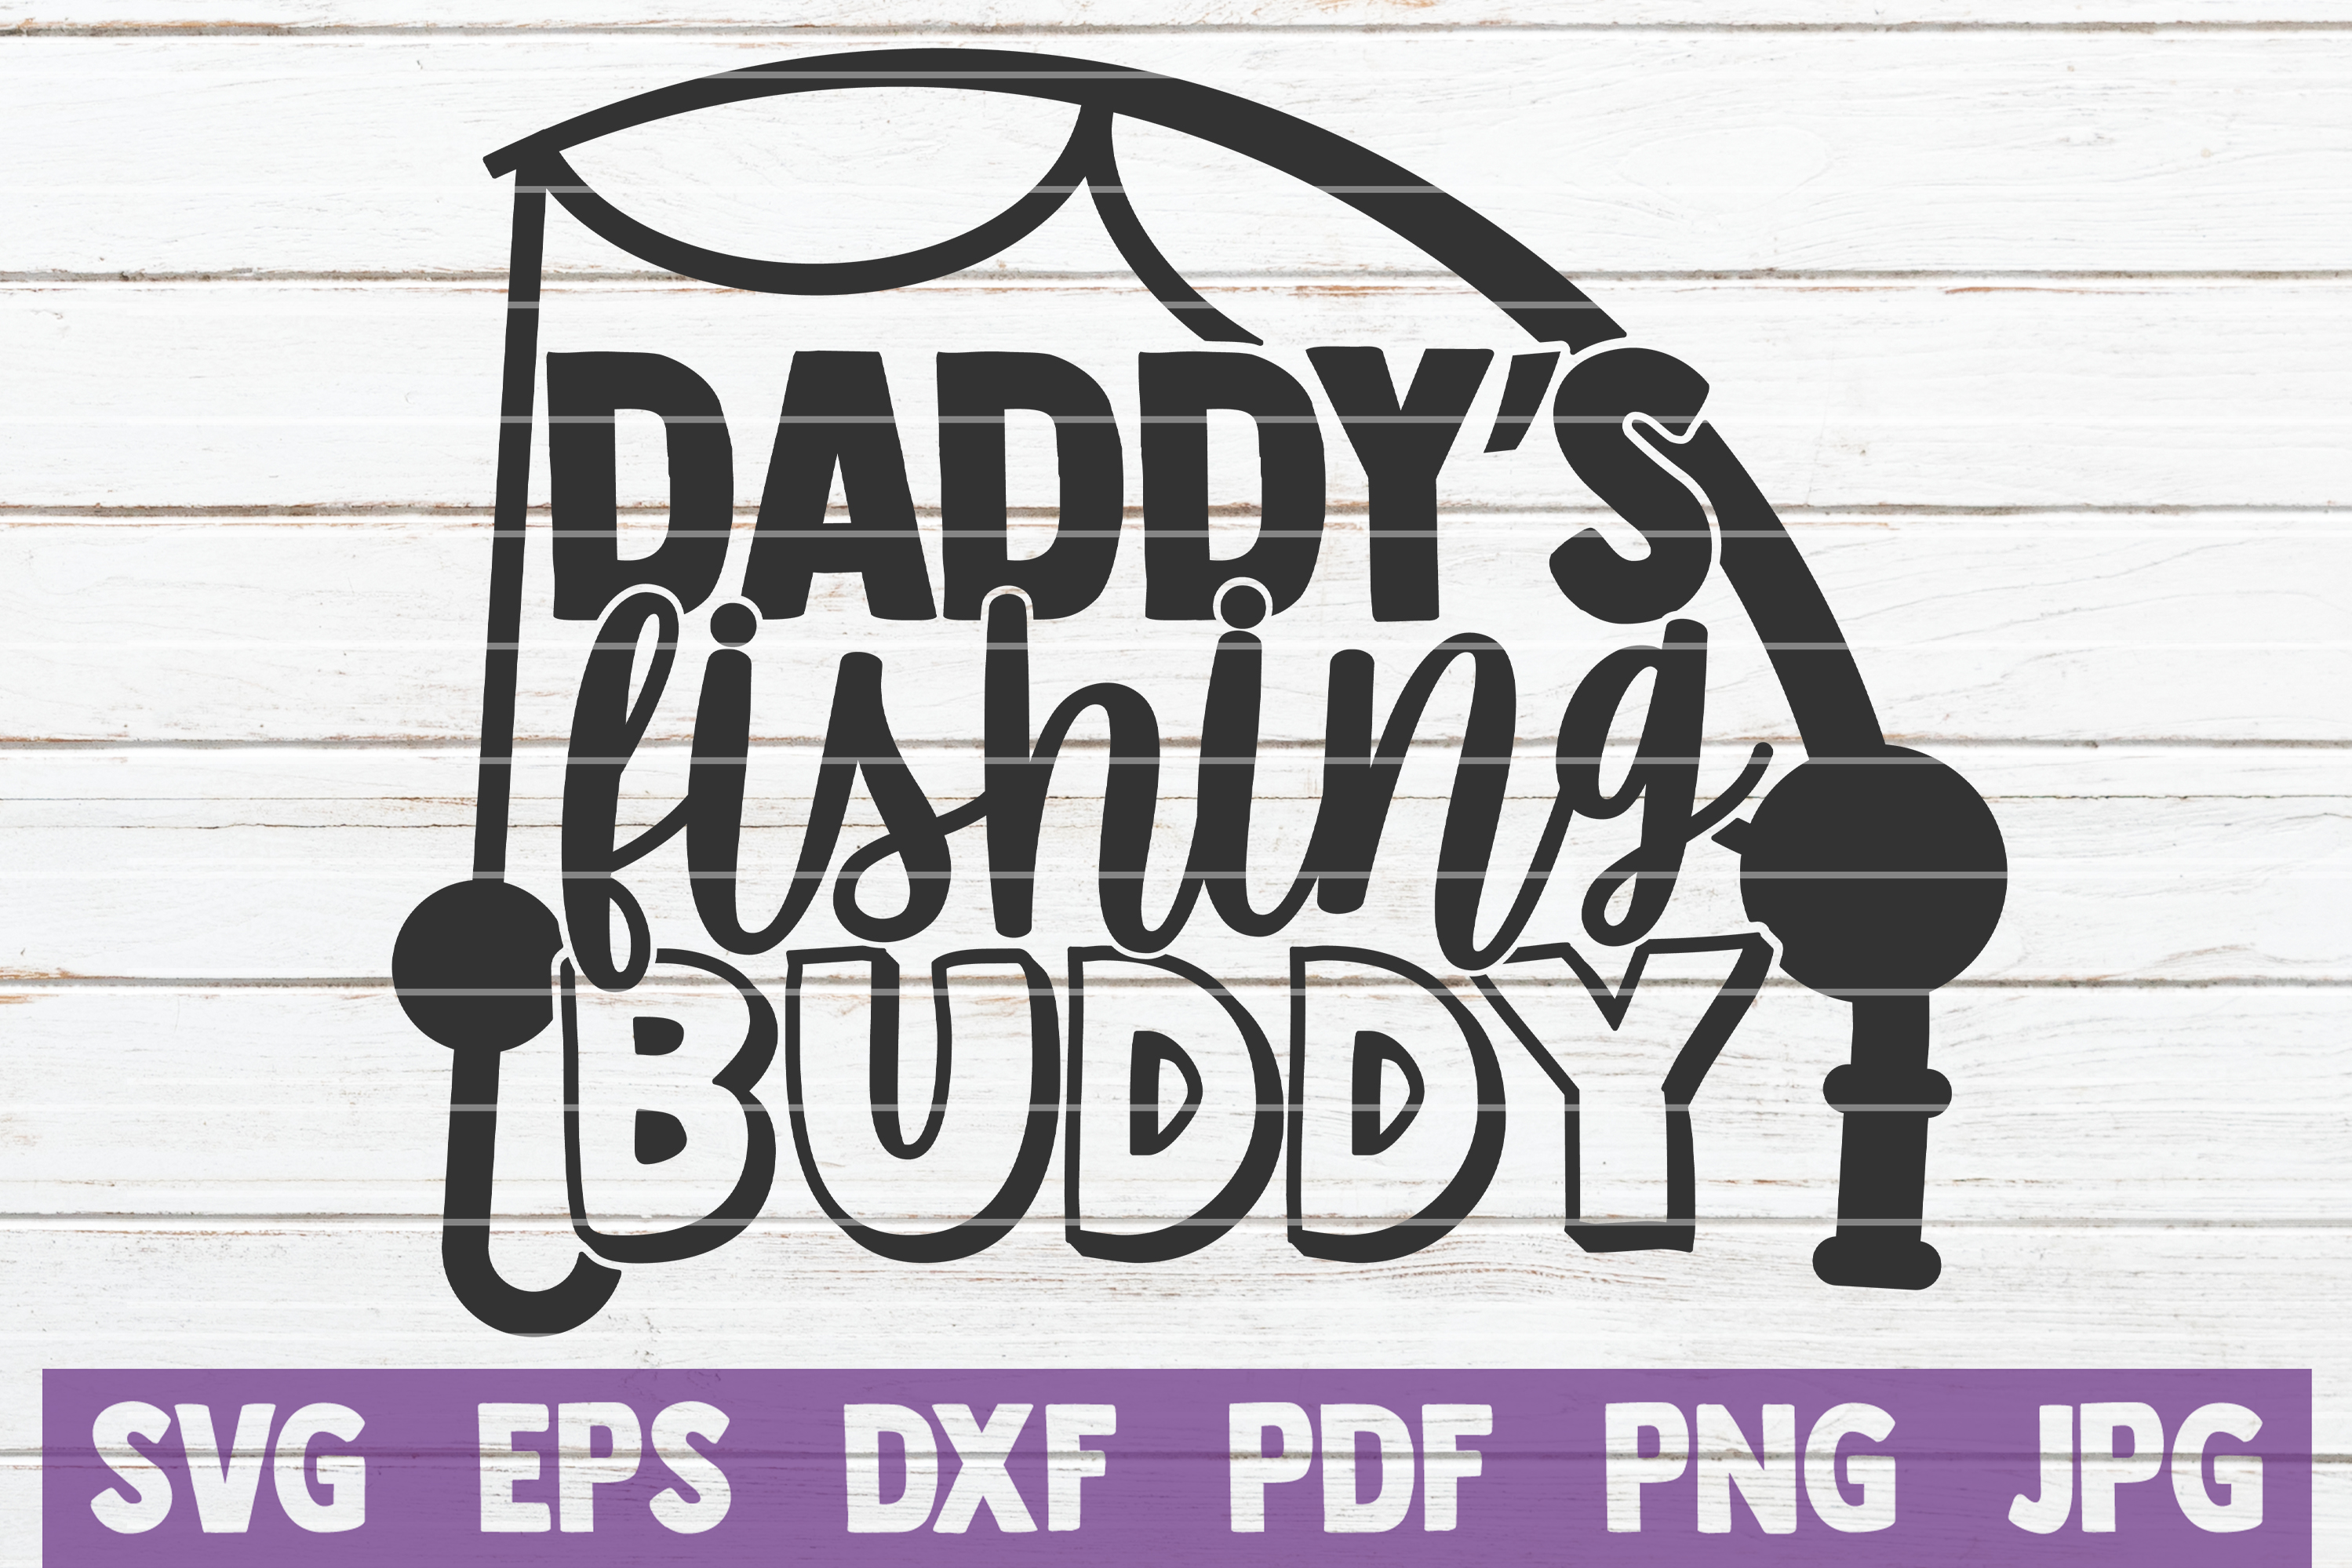 Download Daddy's Fishing Buddy SVG Cut File